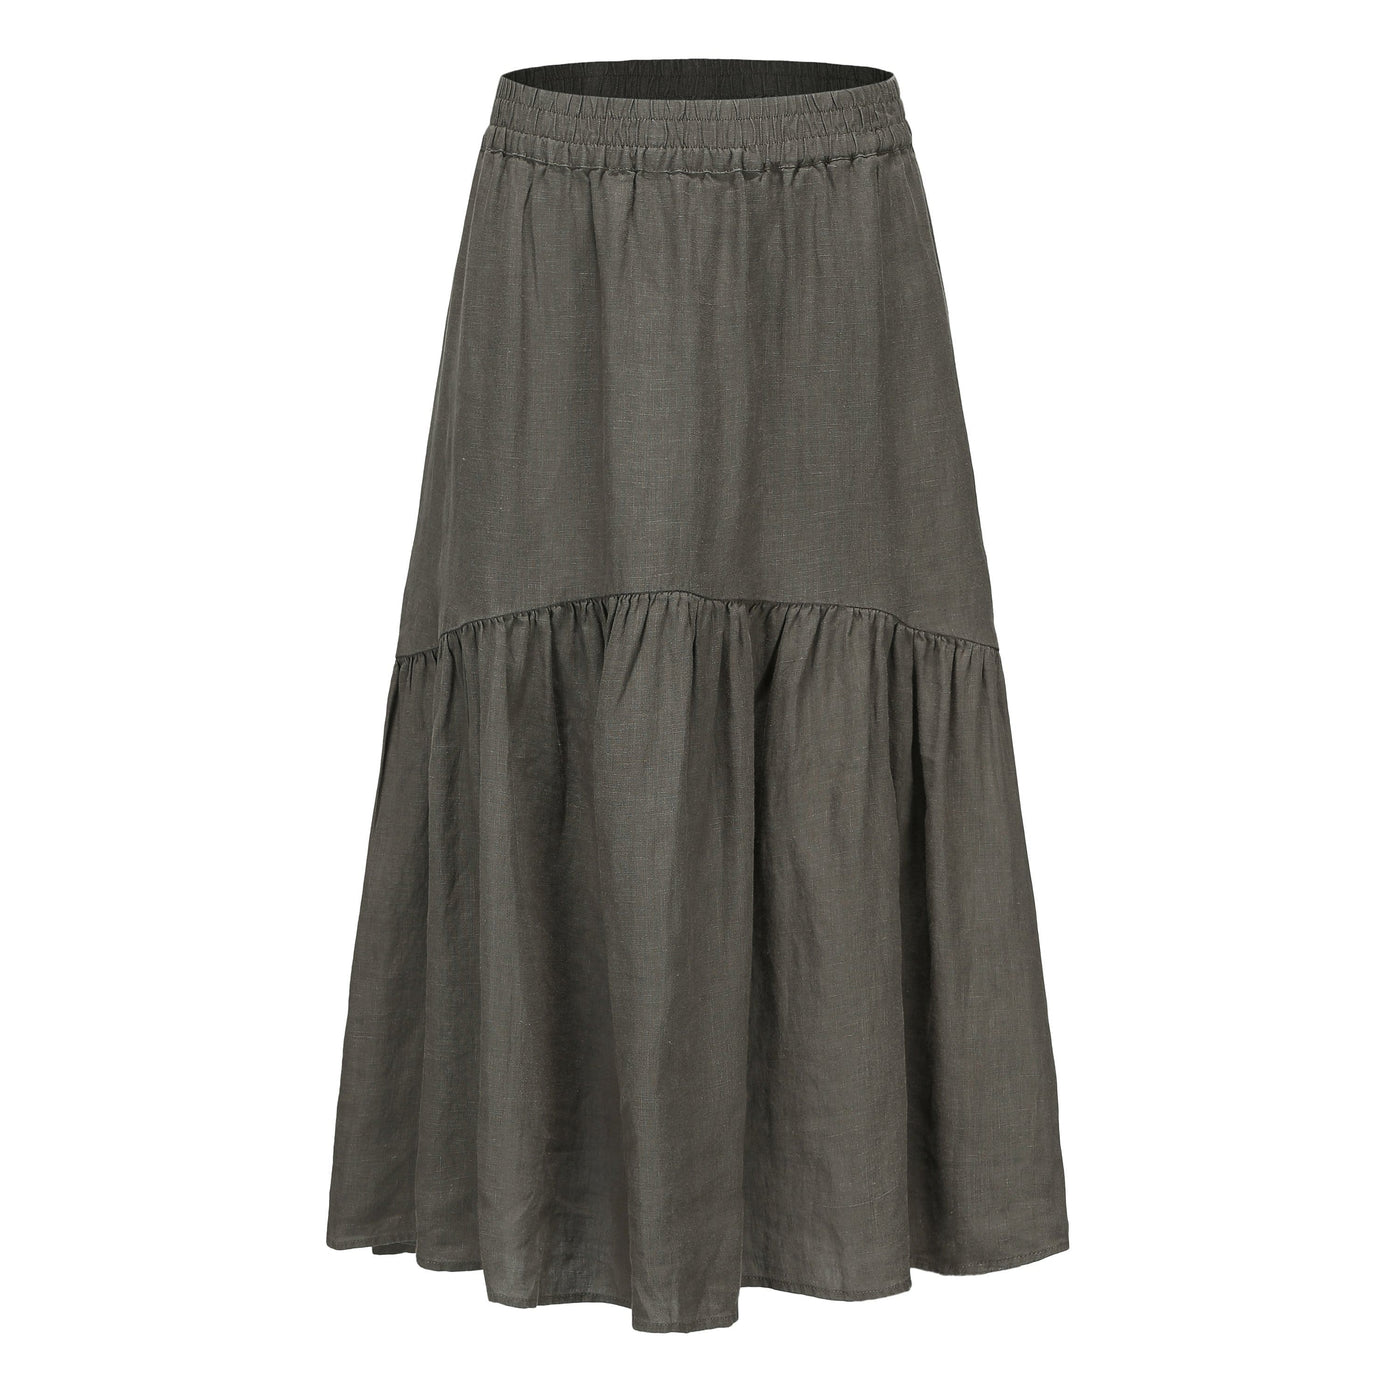 Lilly Pilly Collection 100% organic linen Lola Skirt in Khaki as 3D image showing front view